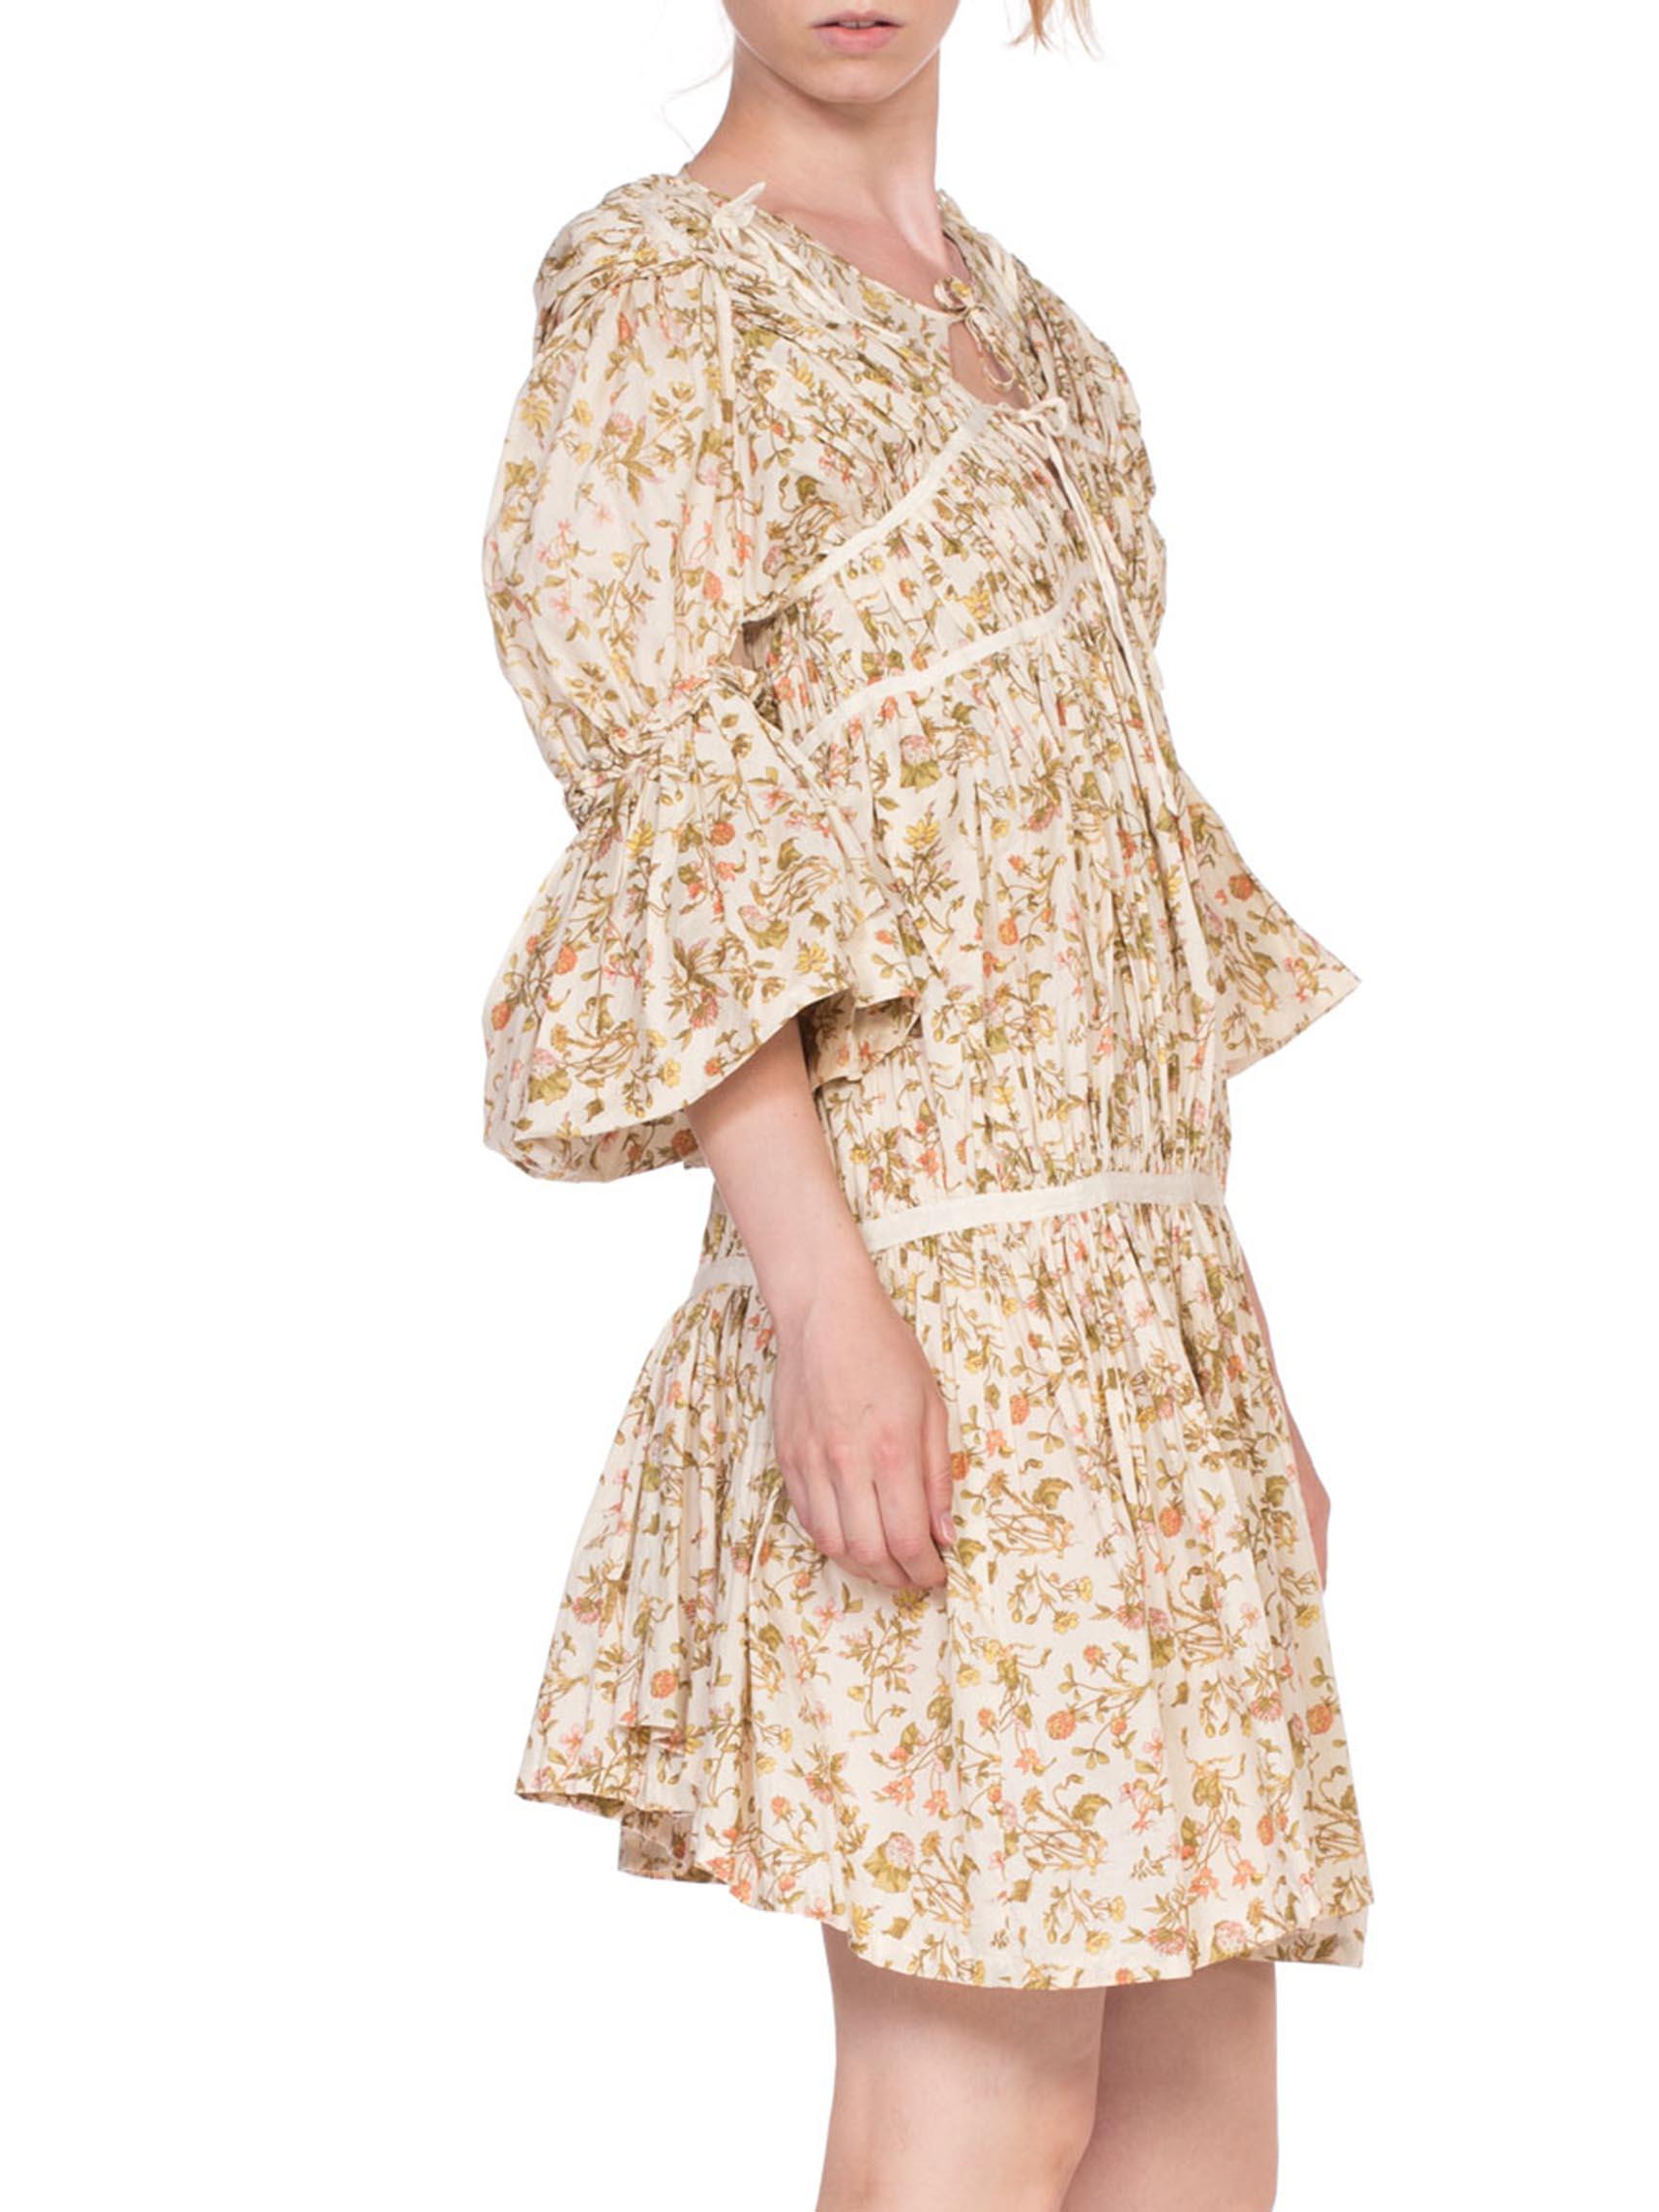 1990'S COMME DES GARÇONS Cotton Lawn Victorian Floral Printed Dress In Excellent Condition For Sale In New York, NY